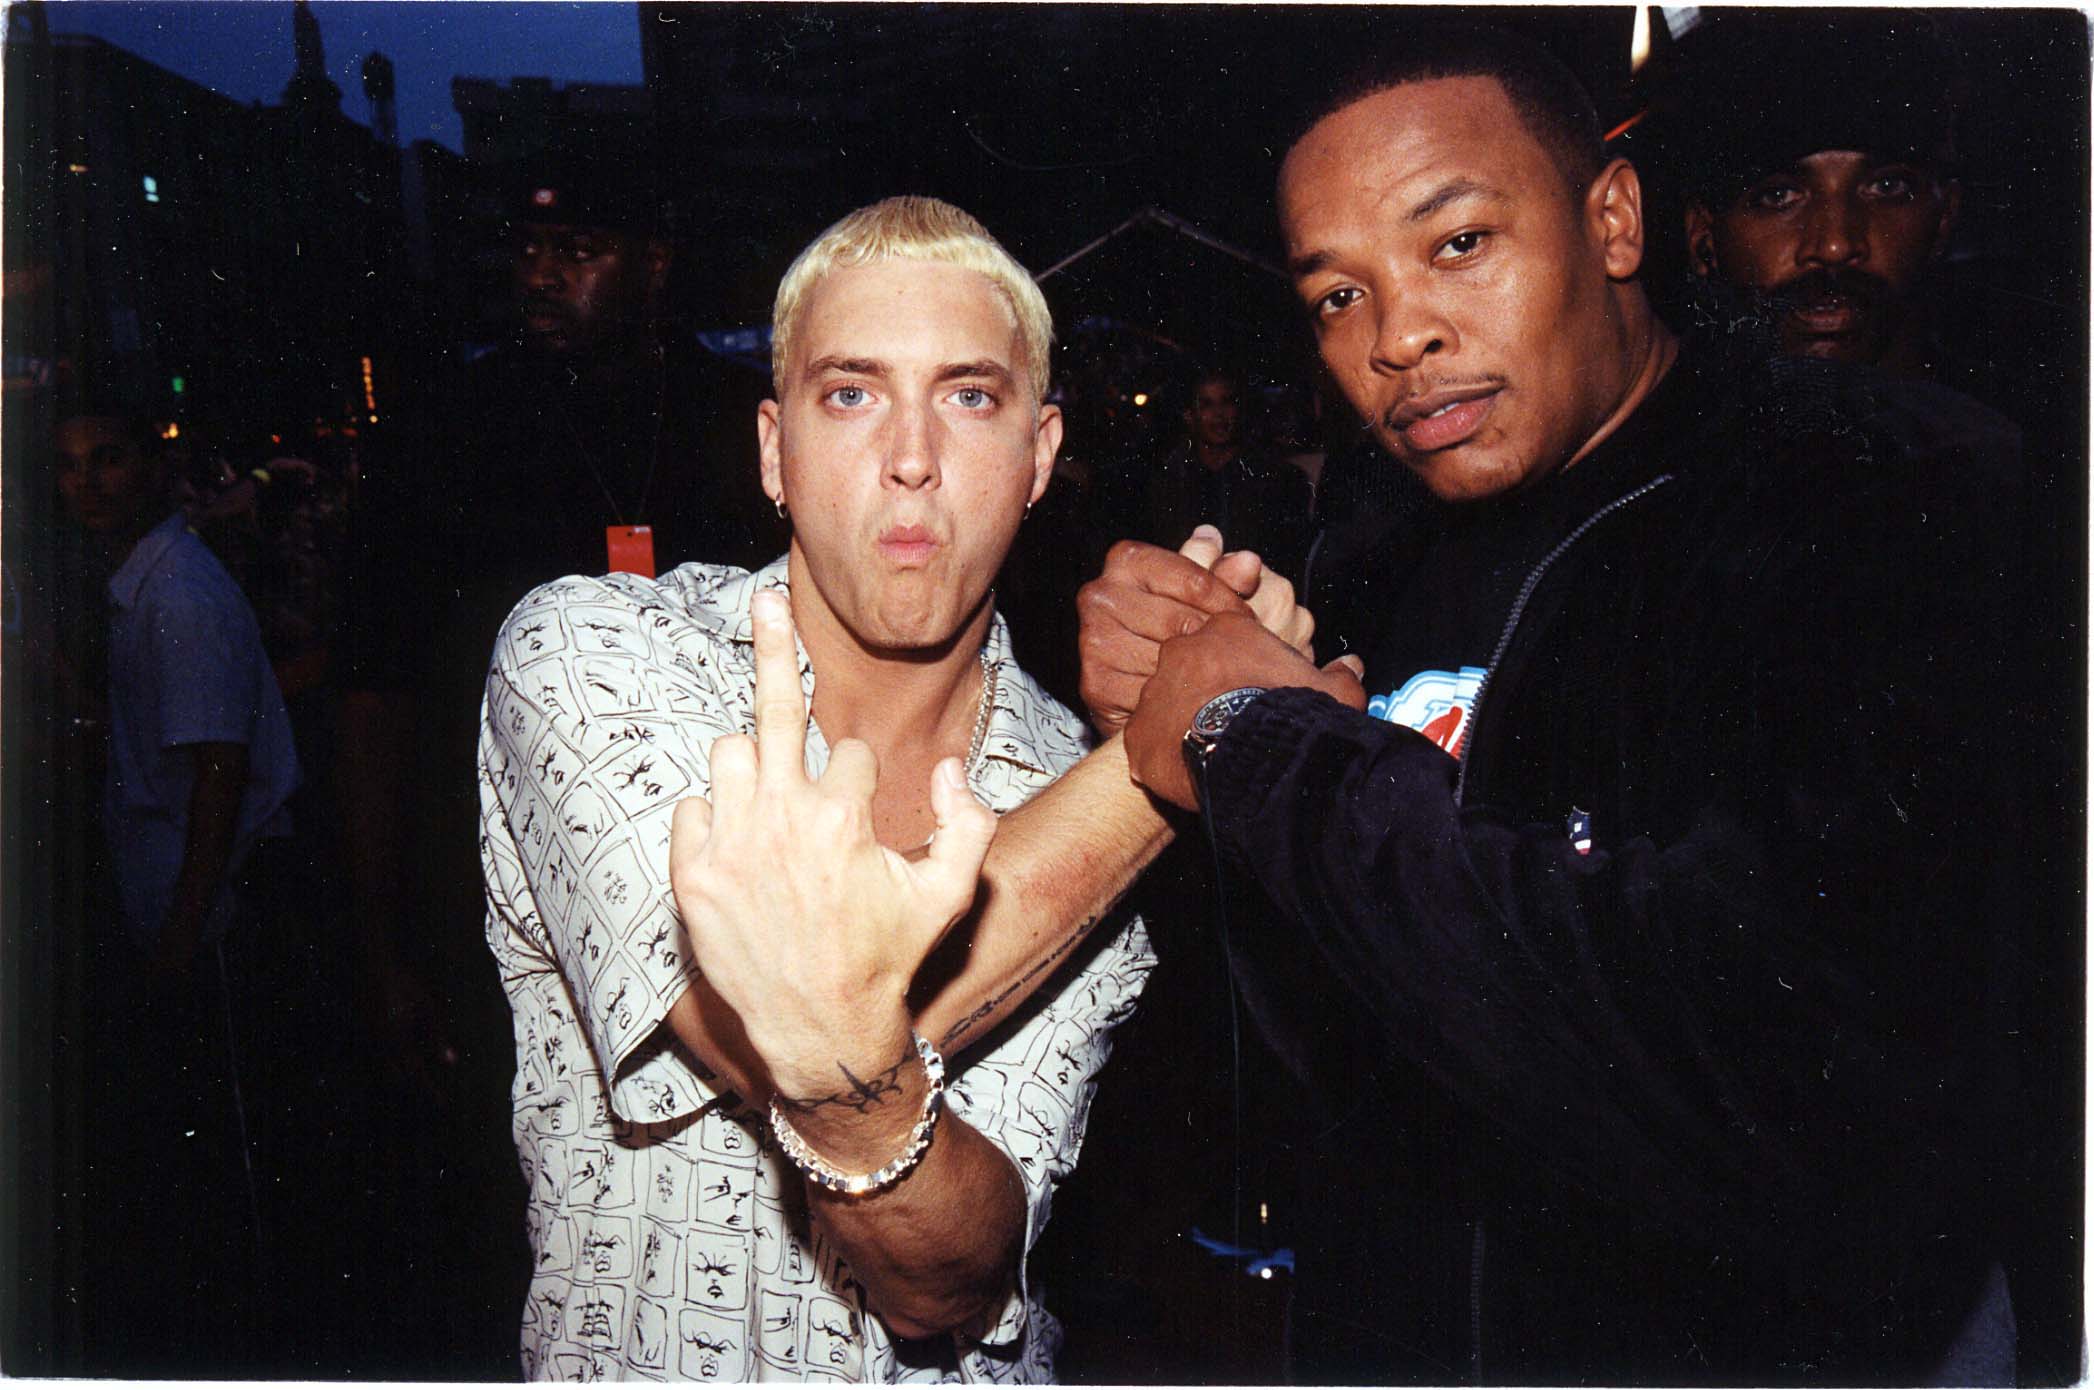 Eminem and Dr. Dre pose at the 1999 MTV Video Music Awards